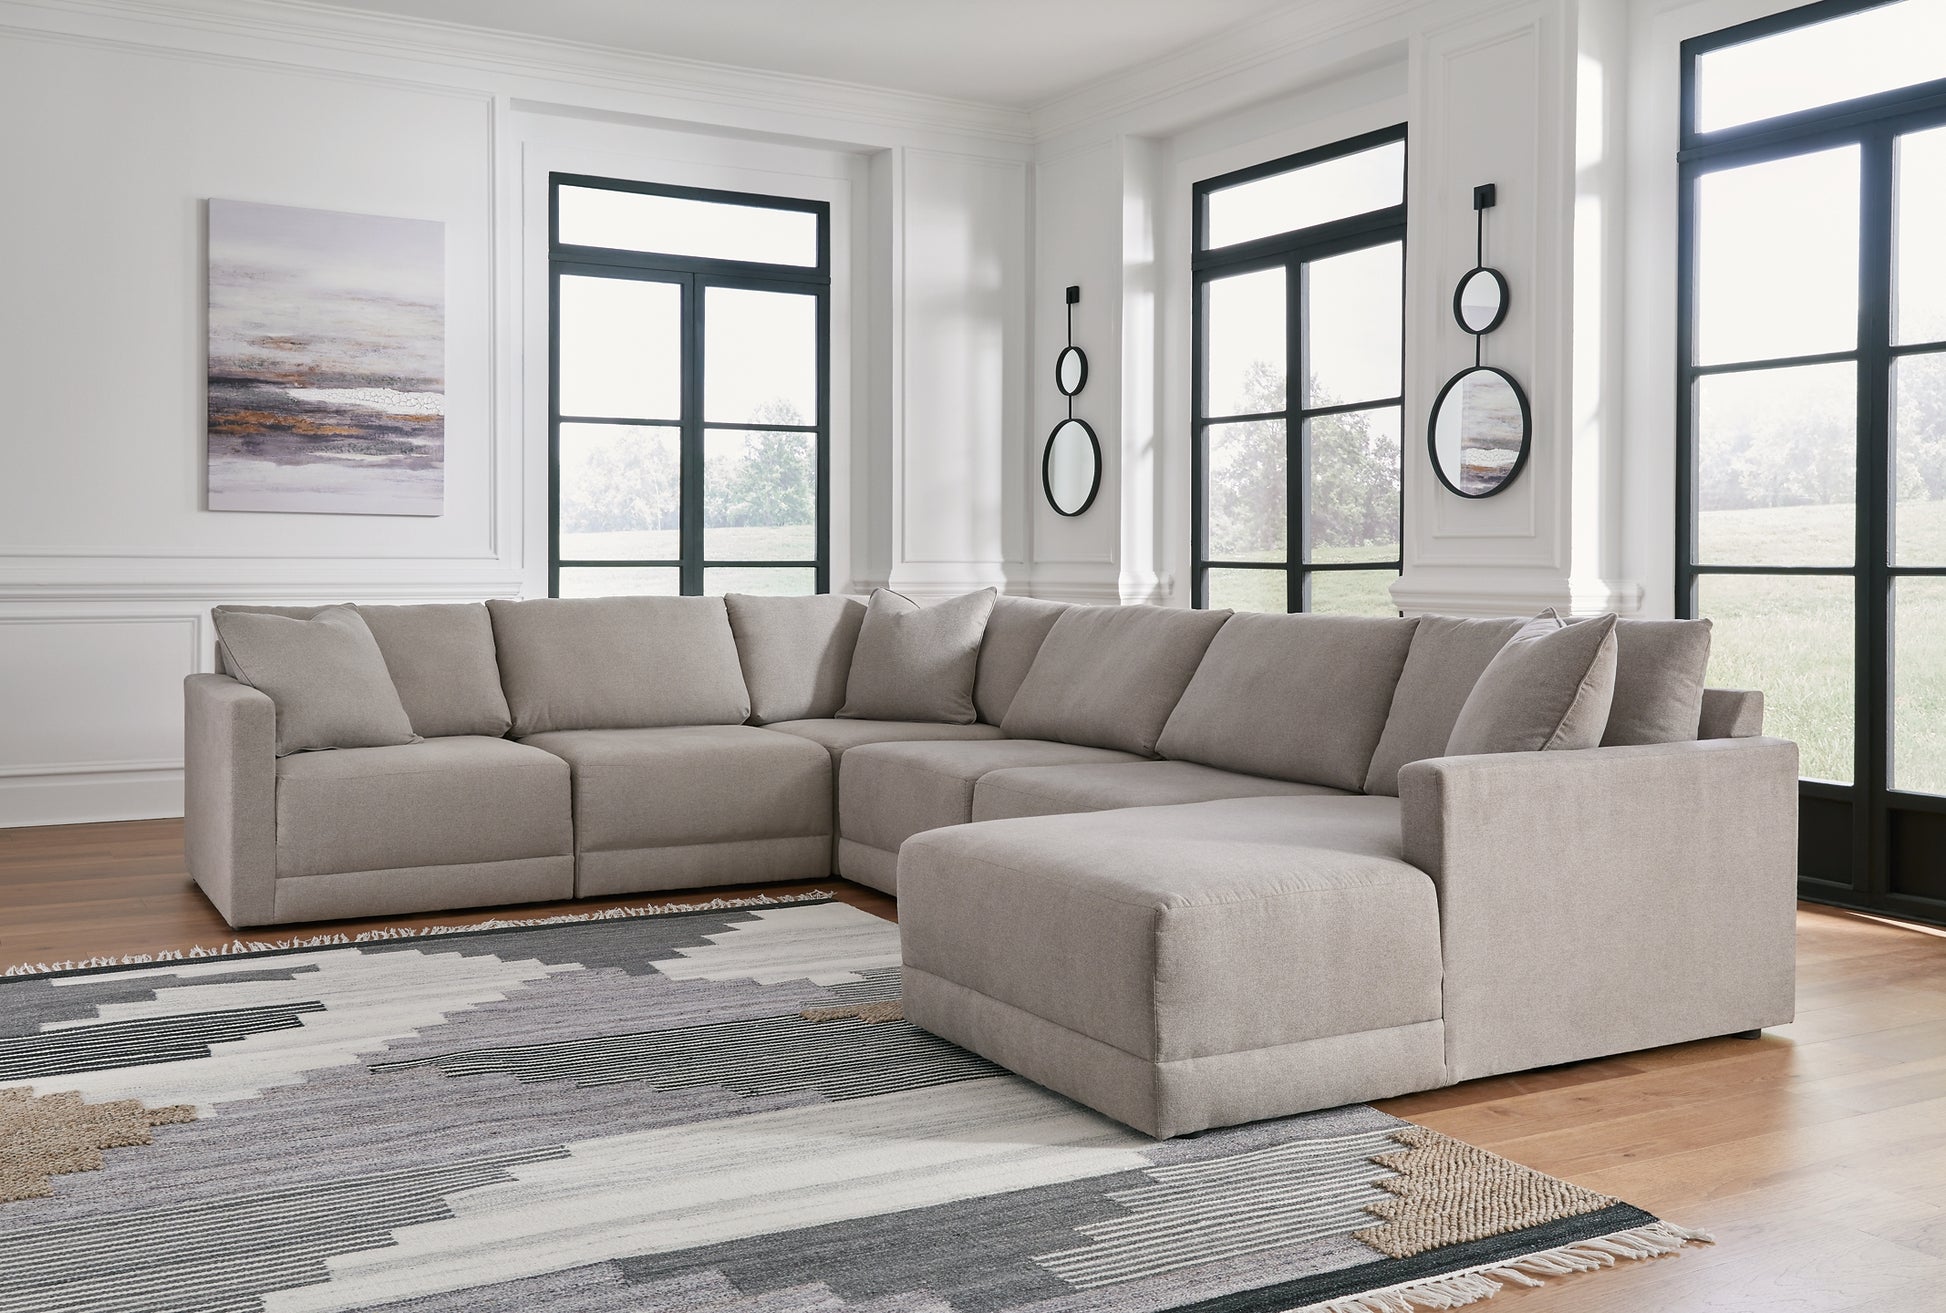 Katany 6-Piece Sectional with Ottoman Wilson Furniture (OH)  in Bridgeport, Ohio. Serving Bridgeport, Yorkville, Bellaire, & Avondale